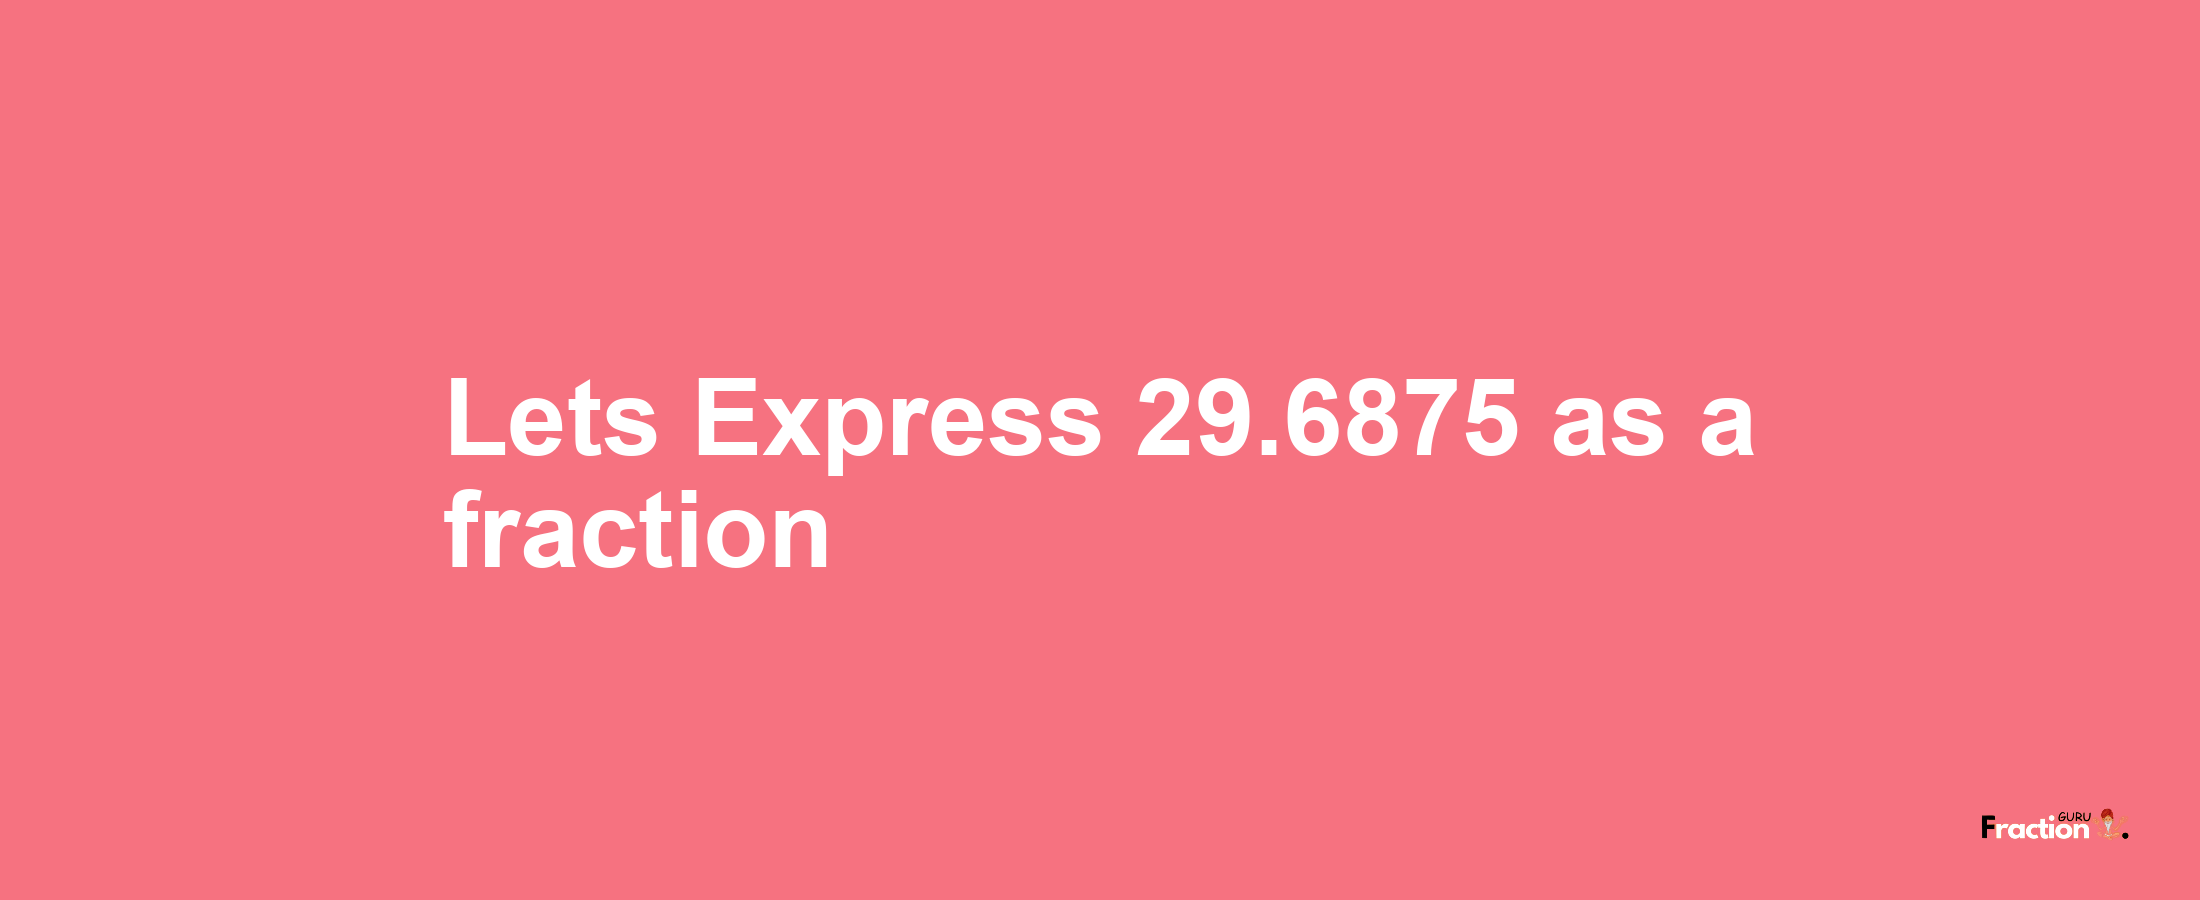 Lets Express 29.6875 as afraction